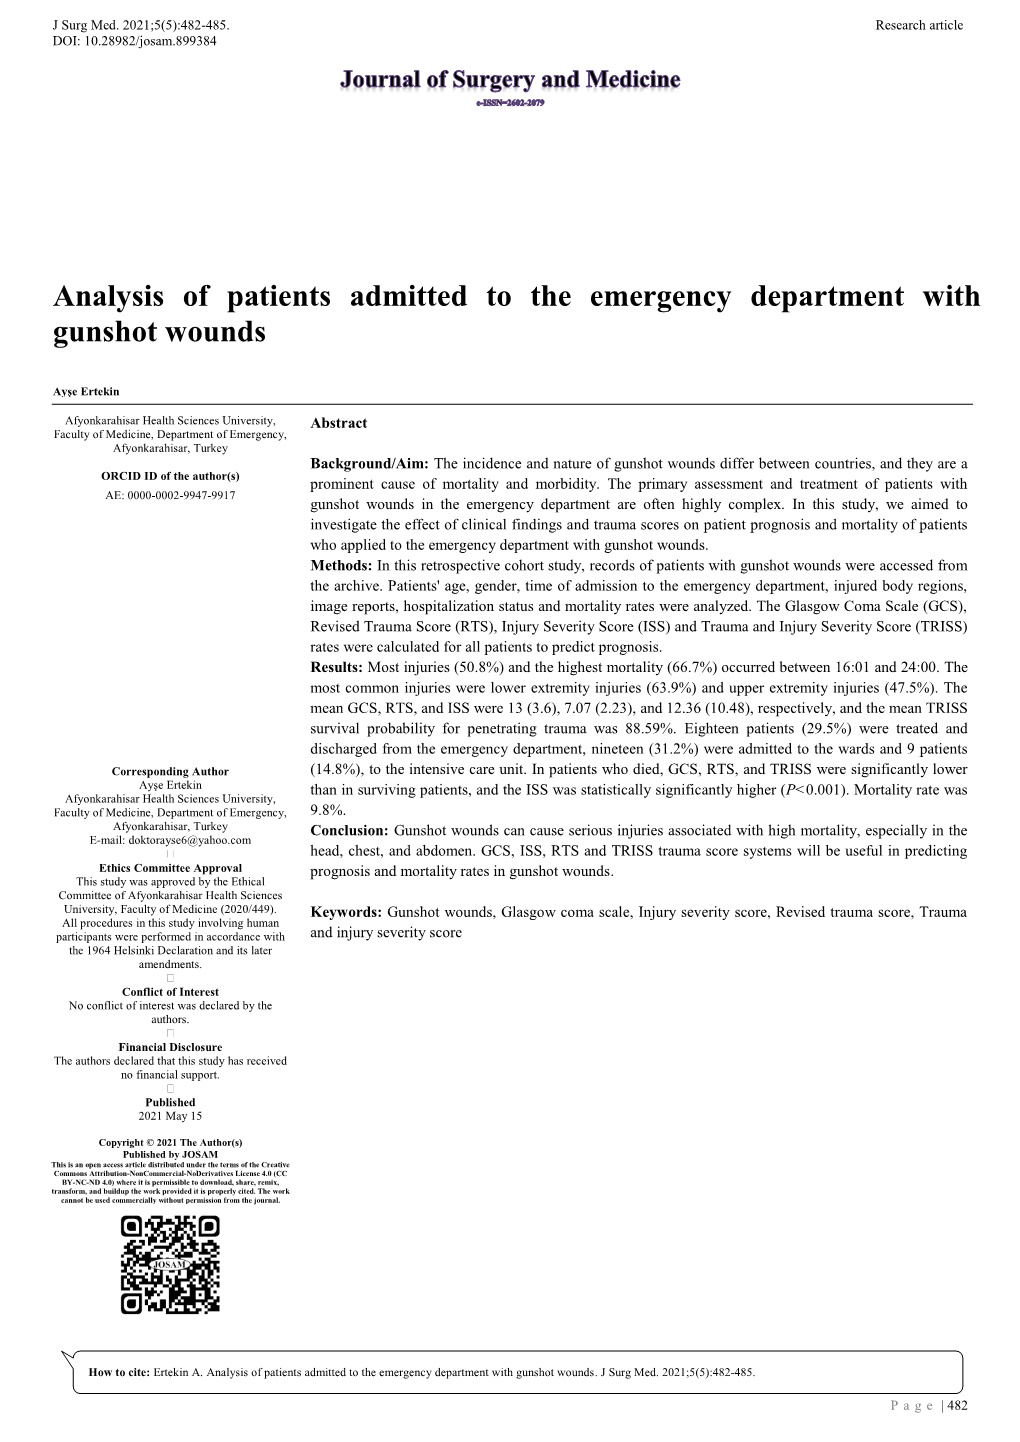 Analysis of Patients Admitted to the Emergency Department with Gunshot Wounds